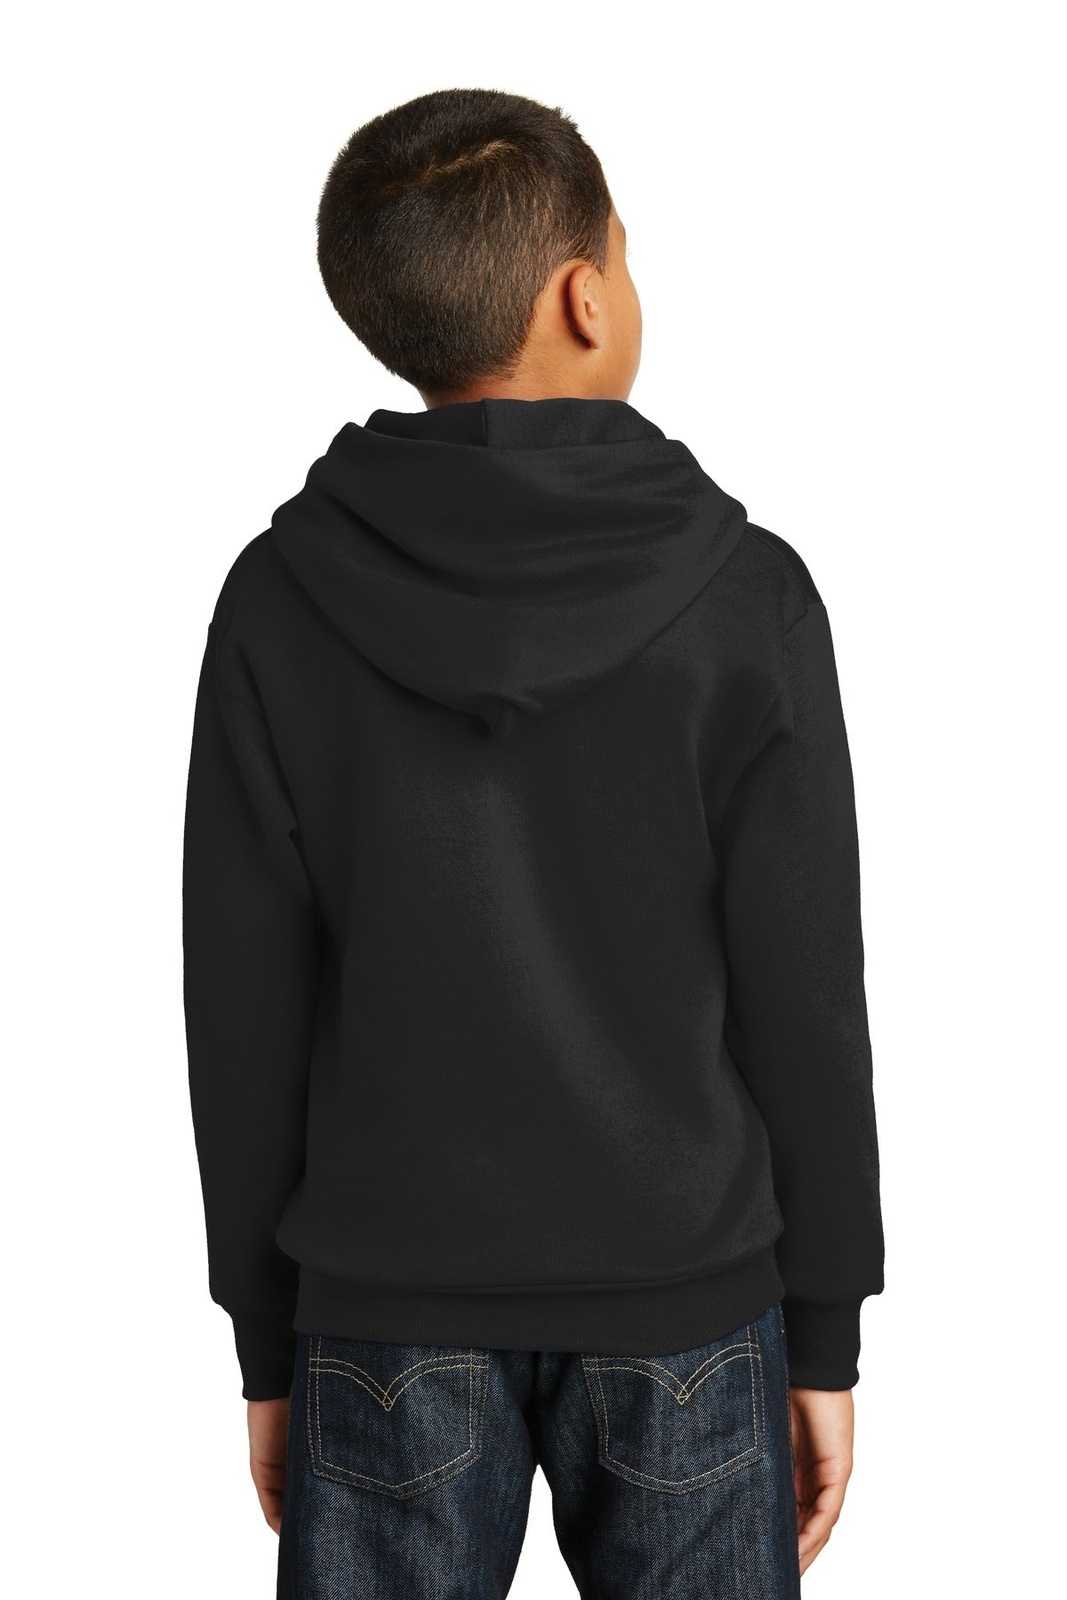 Hanes P470 Youth Ecosmart Pullover Hooded Sweatshirt - Black - HIT a Double - 2